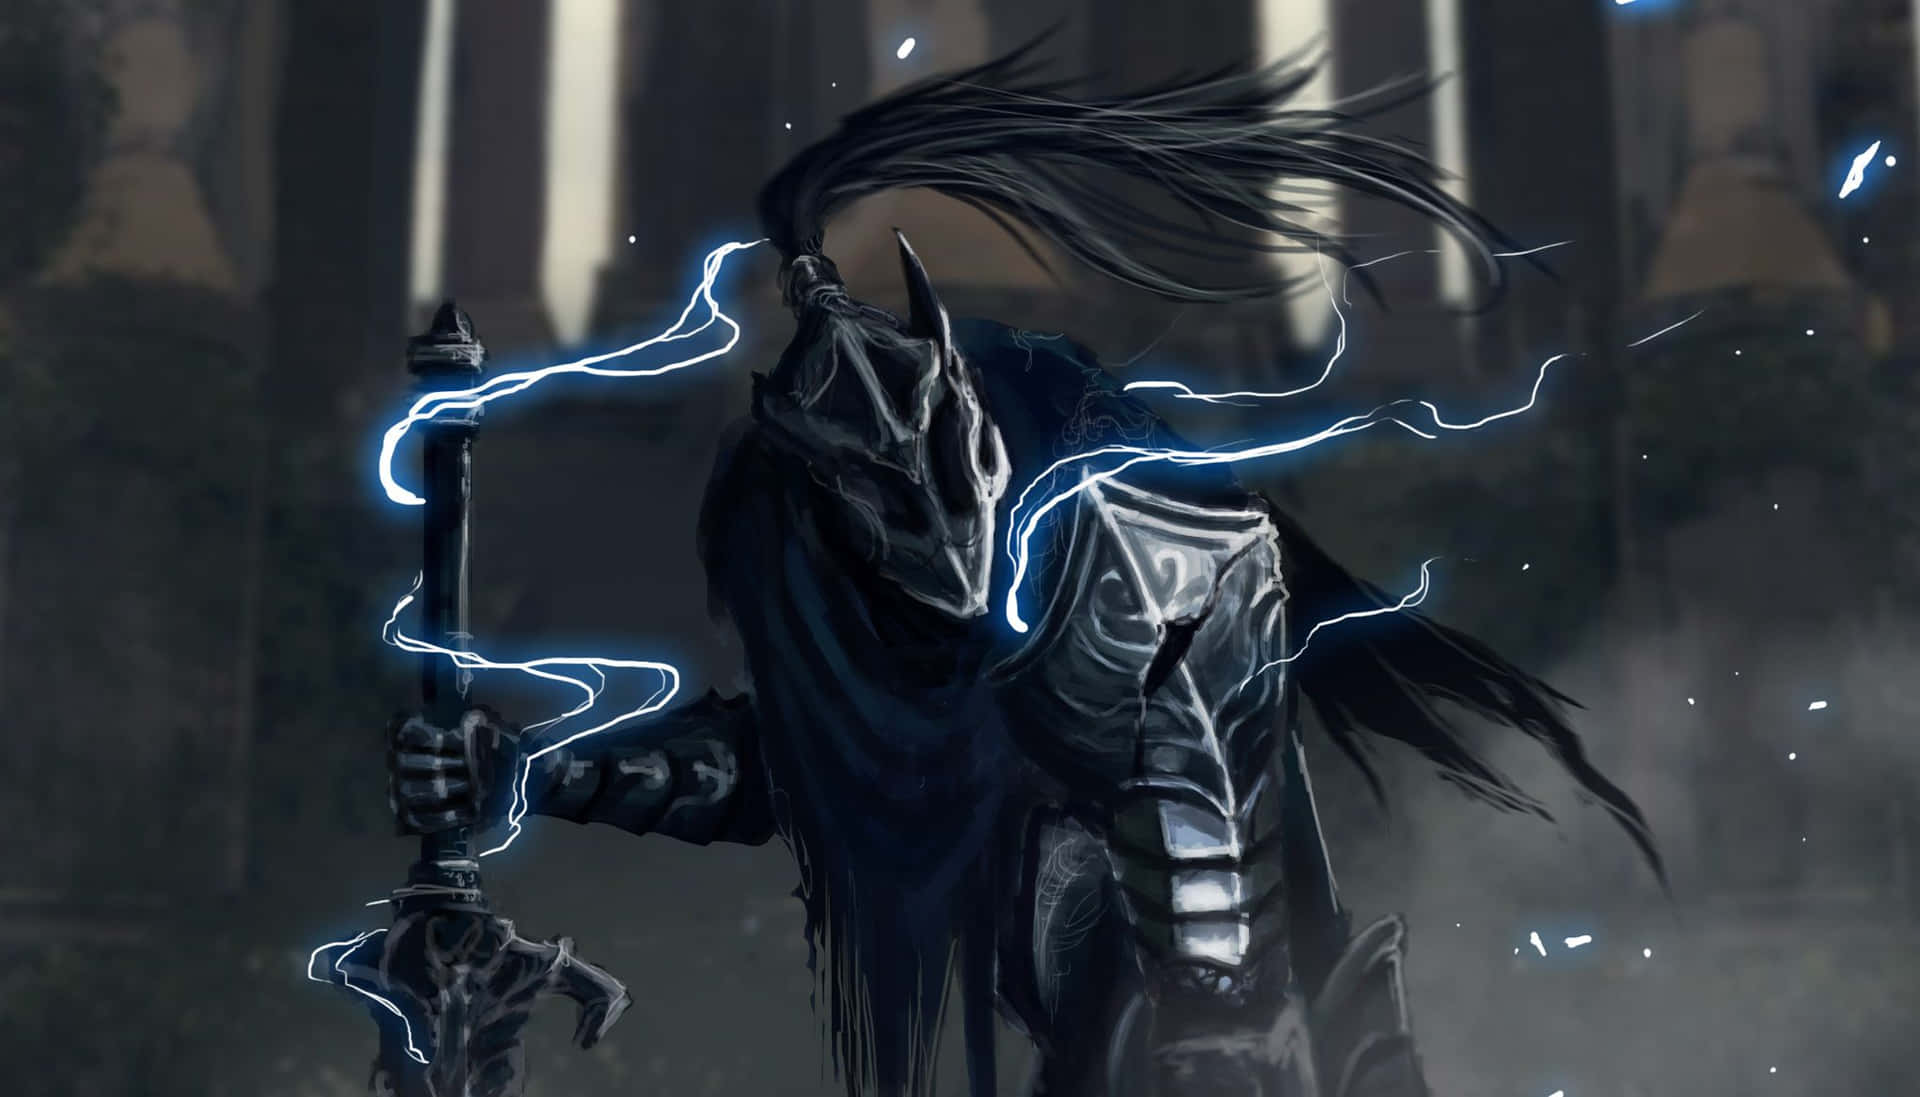 Artorias The Abysswalker Engages in an Epic Battle Wallpaper